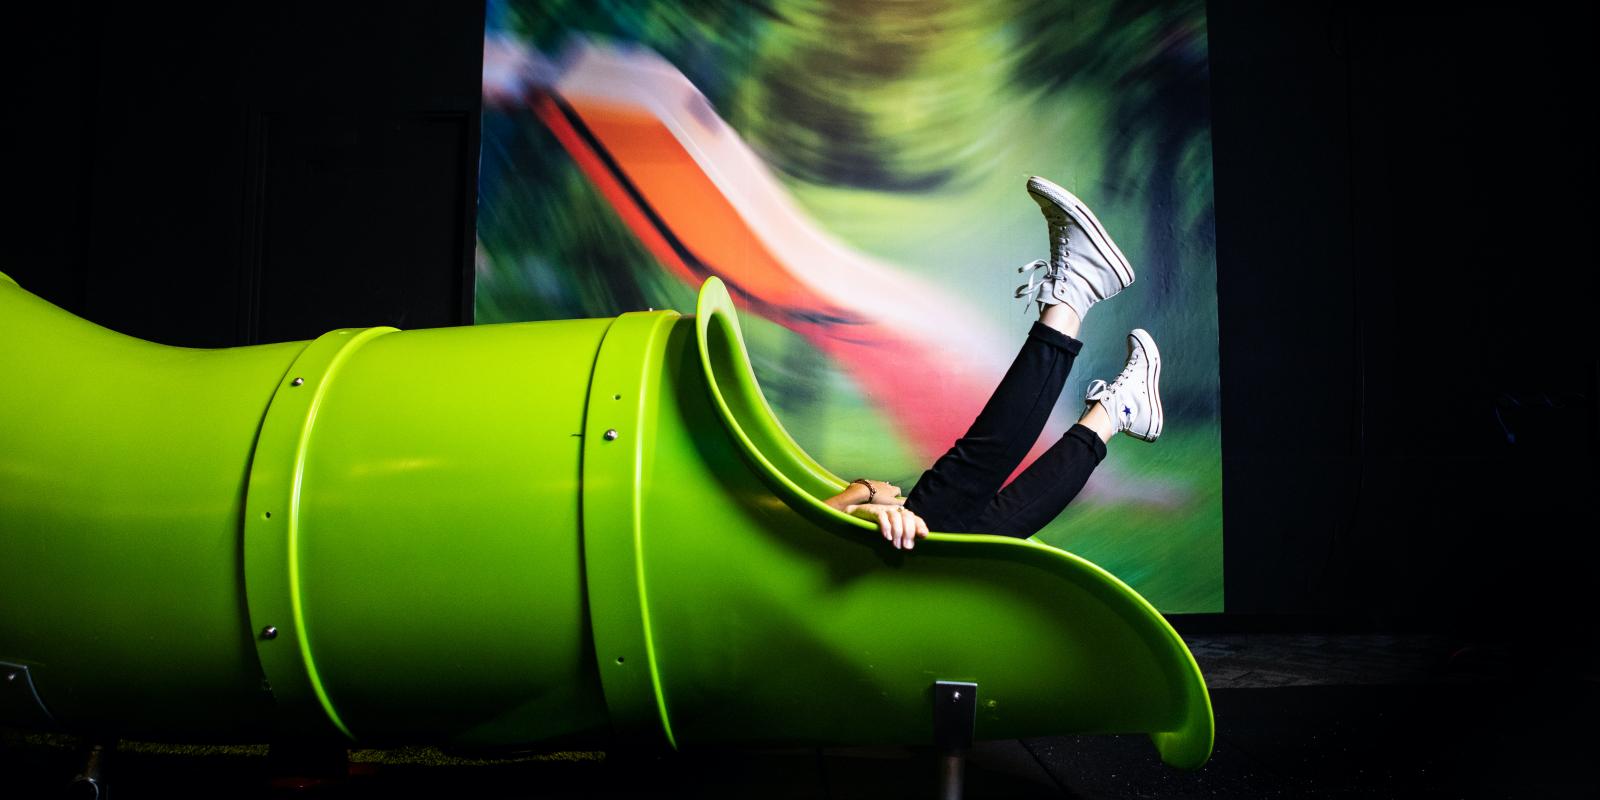 A green slide in a darkened room with a pair of women's legs in jeans coming out the bottom and aimed upward